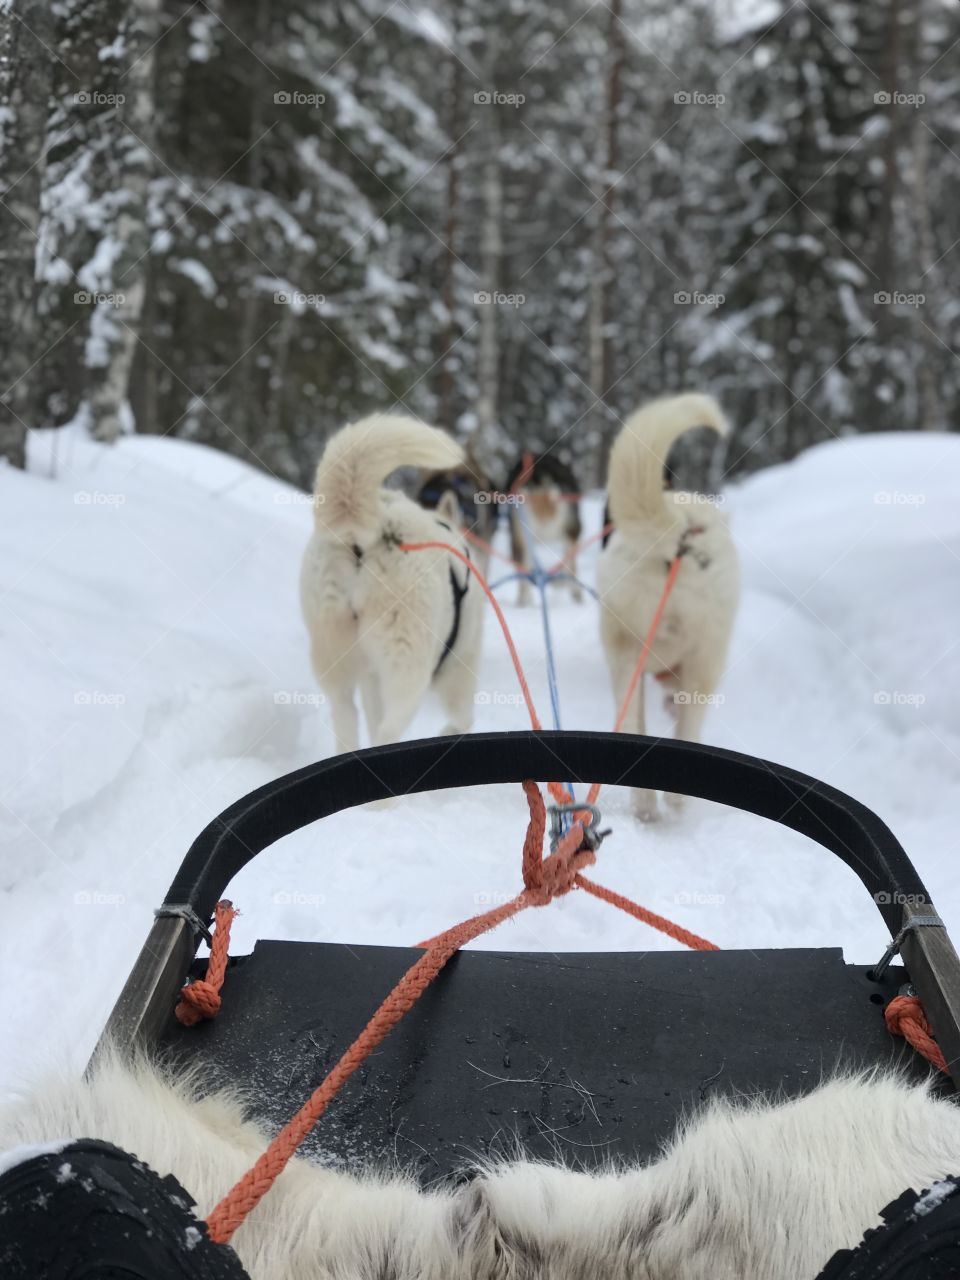 A husky sleigh ride in Oulu, Finland a few months ago. Most amazing experience. 